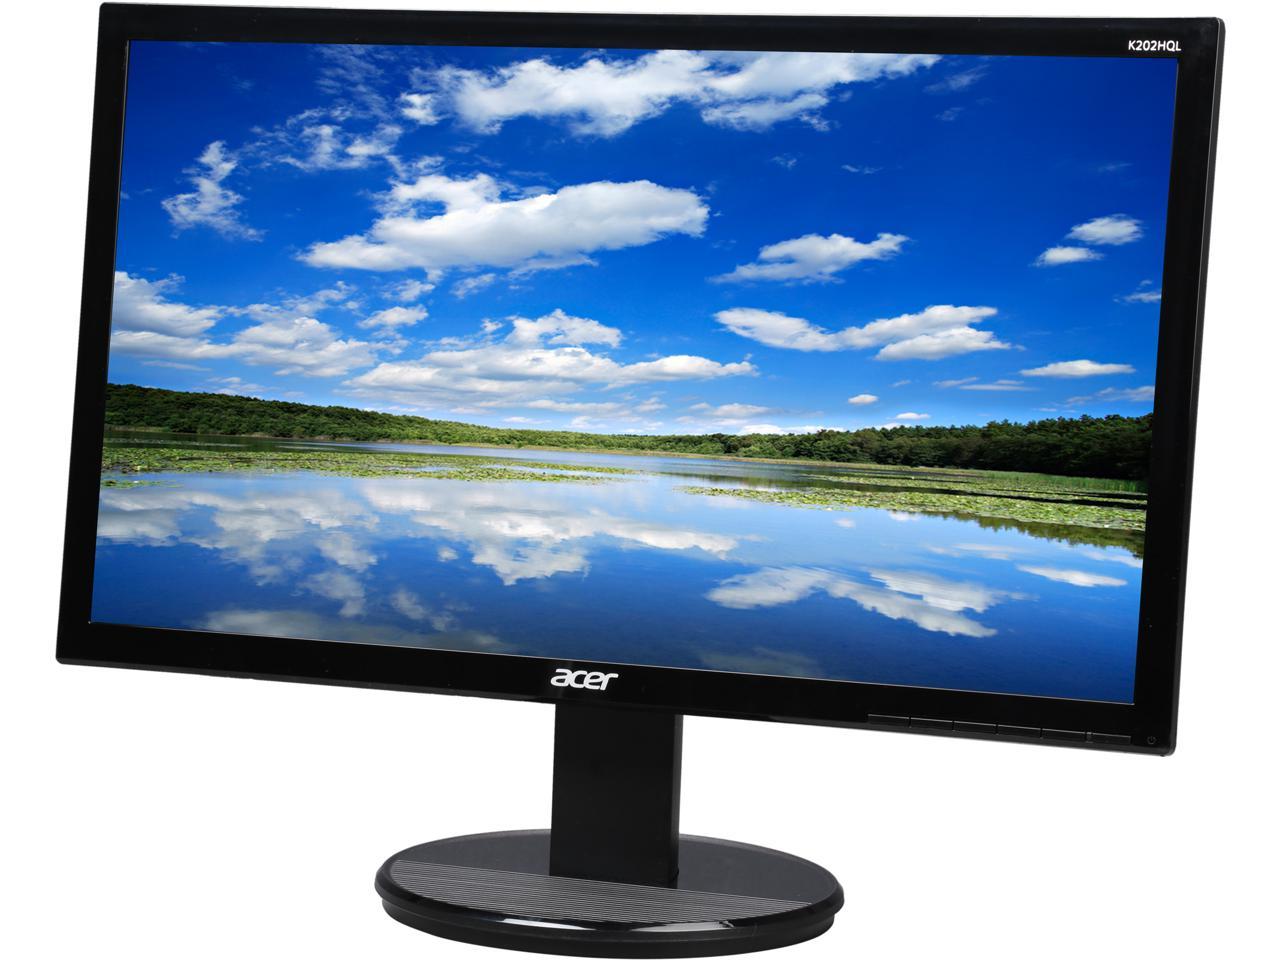 Acer K2 Series K2hql Actual Size 19 5 1600 X 900 Resolution 60hz 5ms Dvi Vga Anti Glare Hdcp Support Backlit Led Lcd Monitor Newegg Com